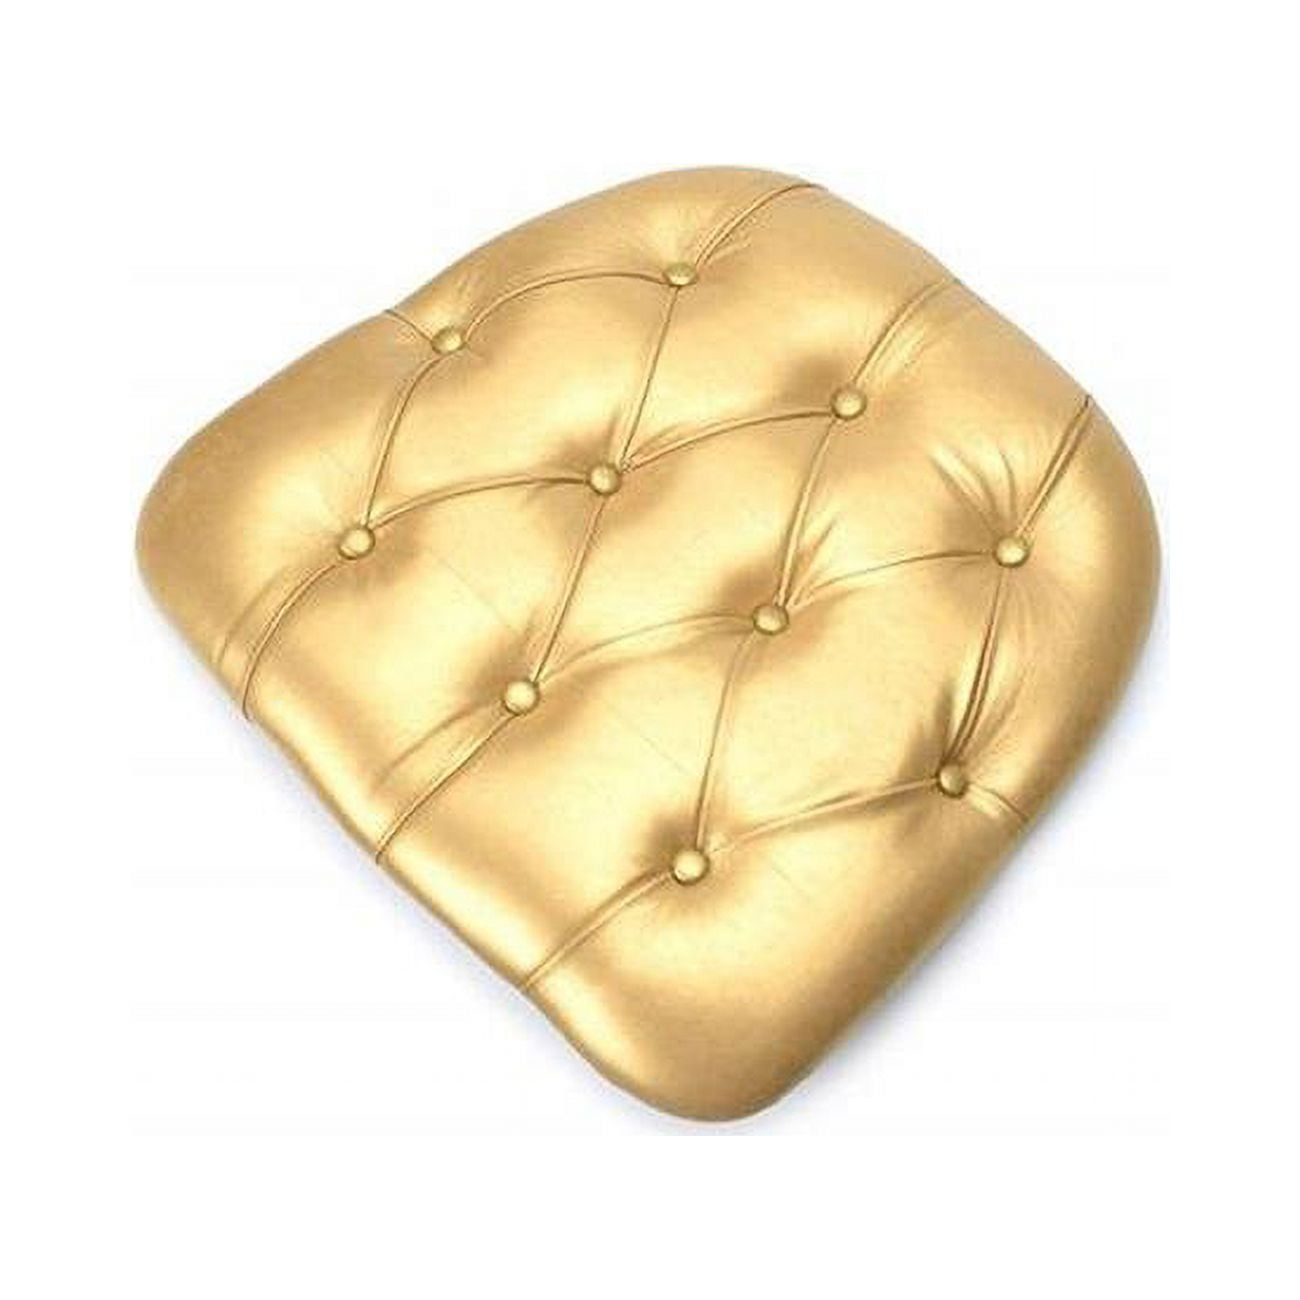 Cup-v-tufted-gl-web6 Indoor & Outdoor Gold Tufted Vinyl Cushions, Set Of 6 - 2 X 16 X 16 In.